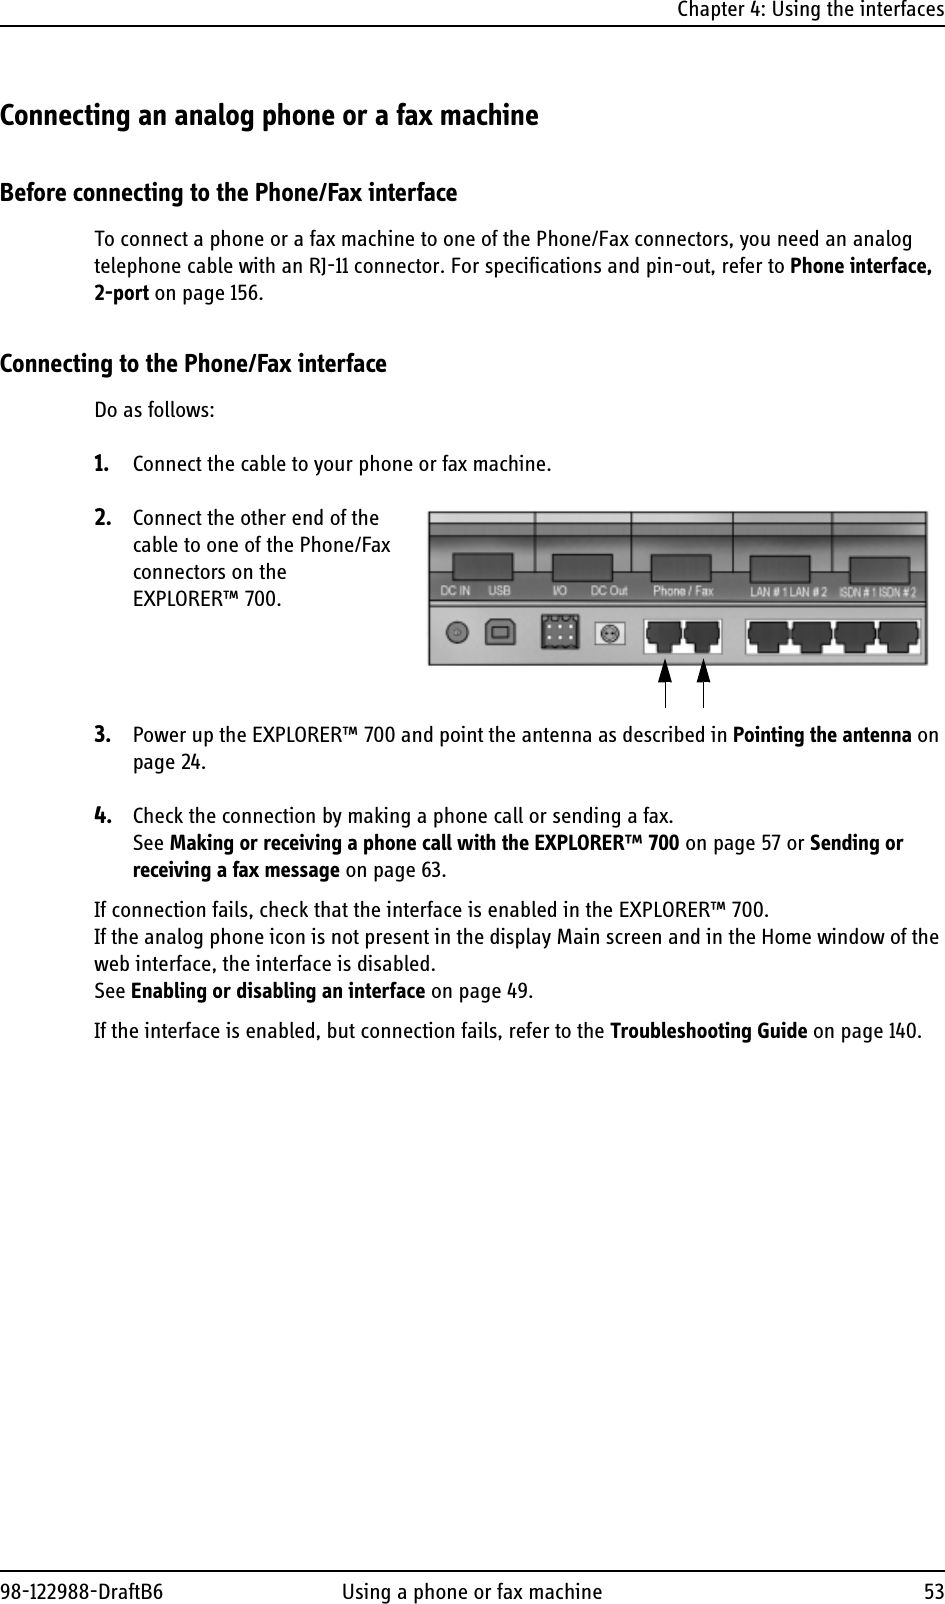 Chapter 4: Using the interfaces98-122988-DraftB6 Using a phone or fax machine 53Connecting an analog phone or a fax machineBefore connecting to the Phone/Fax interfaceTo connect a phone or a fax machine to one of the Phone/Fax connectors, you need an analog telephone cable with an RJ-11 connector. For specifications and pin-out, refer to Phone interface, 2-port on page 156.Connecting to the Phone/Fax interfaceDo as follows:1. Connect the cable to your phone or fax machine.2. Connect the other end of the cable to one of the Phone/Fax connectors on the EXPLORER™ 700. 3. Power up the EXPLORER™ 700 and point the antenna as described in Pointing the antenna on page 24. 4. Check the connection by making a phone call or sending a fax. See Making or receiving a phone call with the EXPLORER™ 700 on page 57 or Sending or receiving a fax message on page 63.If connection fails, check that the interface is enabled in the EXPLORER™ 700.If the analog phone icon is not present in the display Main screen and in the Home window of the web interface, the interface is disabled. See Enabling or disabling an interface on page 49.If the interface is enabled, but connection fails, refer to the Troubleshooting Guide on page 140.